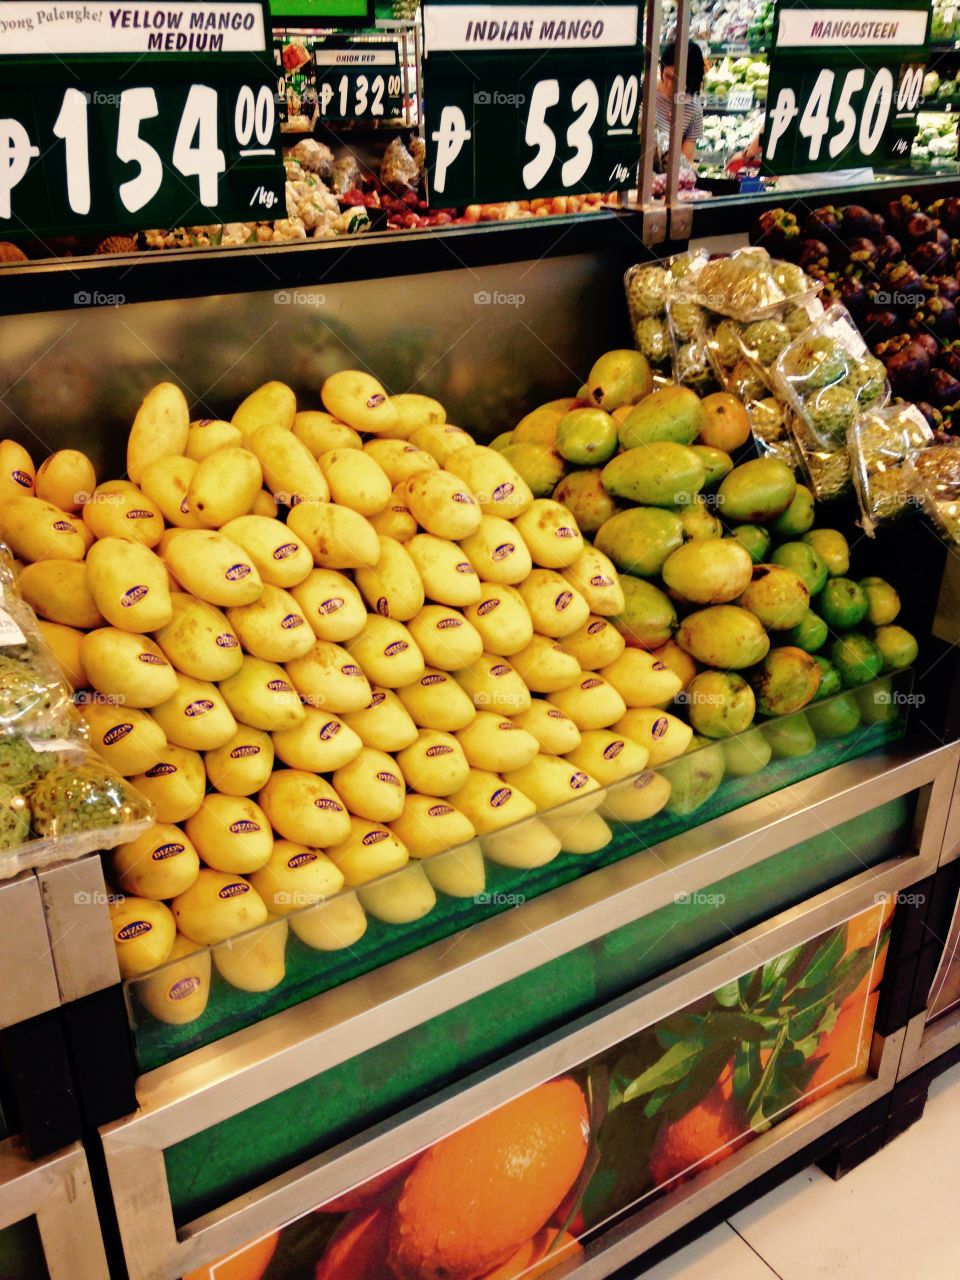 these are Philippine ripe and still green mangoes. The yellow mangoes are very sweet and considered to be one of the best in the world.  The are exported all over.